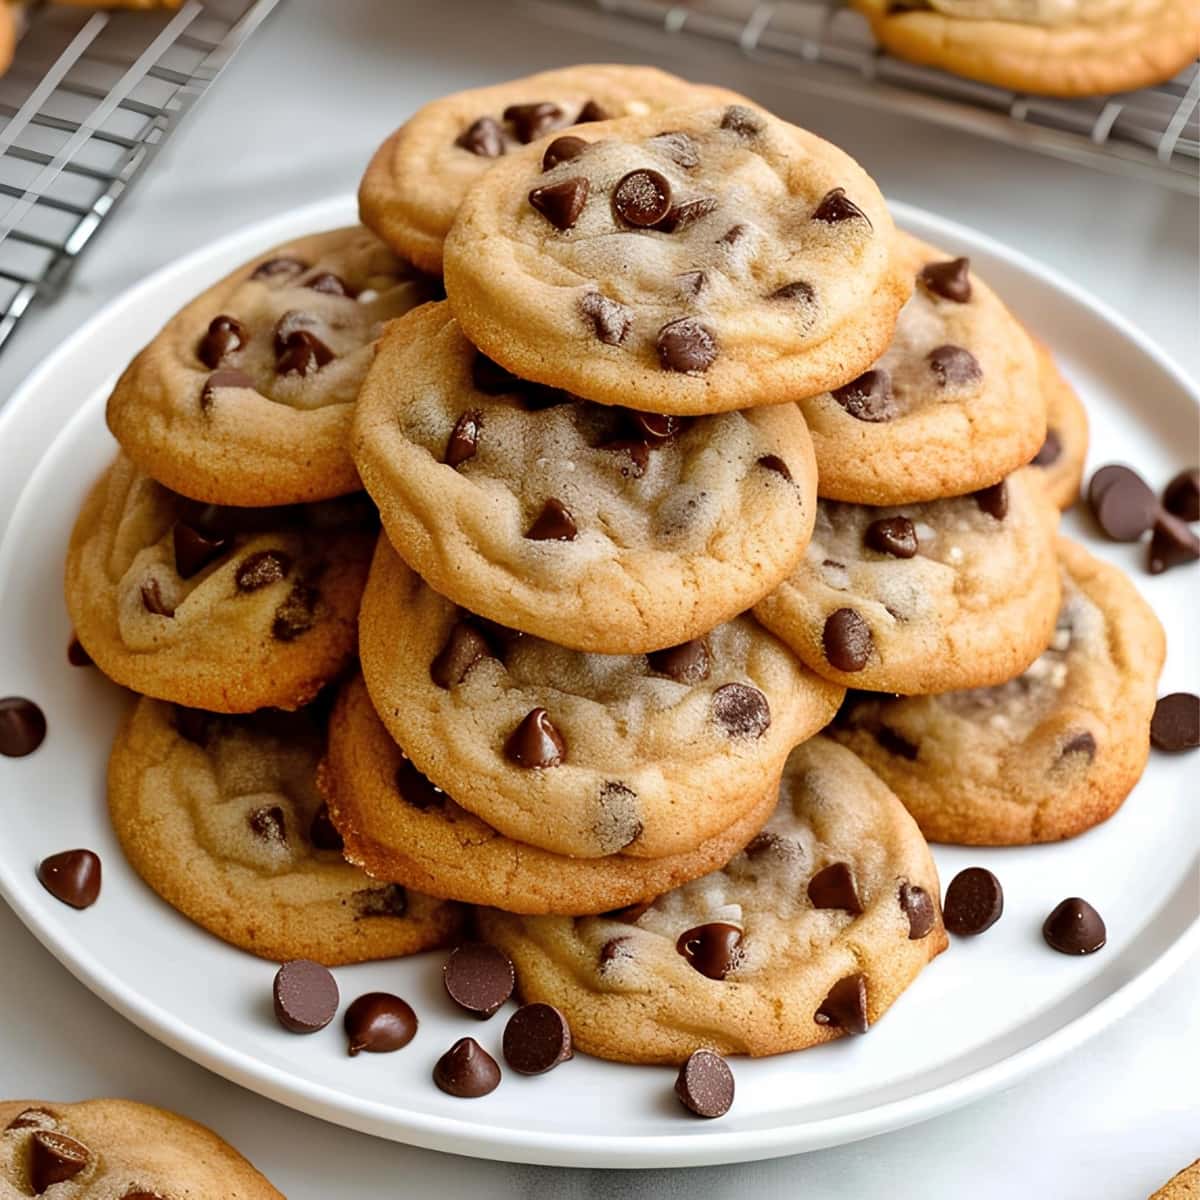 A stack of crispy, soft and chewy chocolate chip cookies